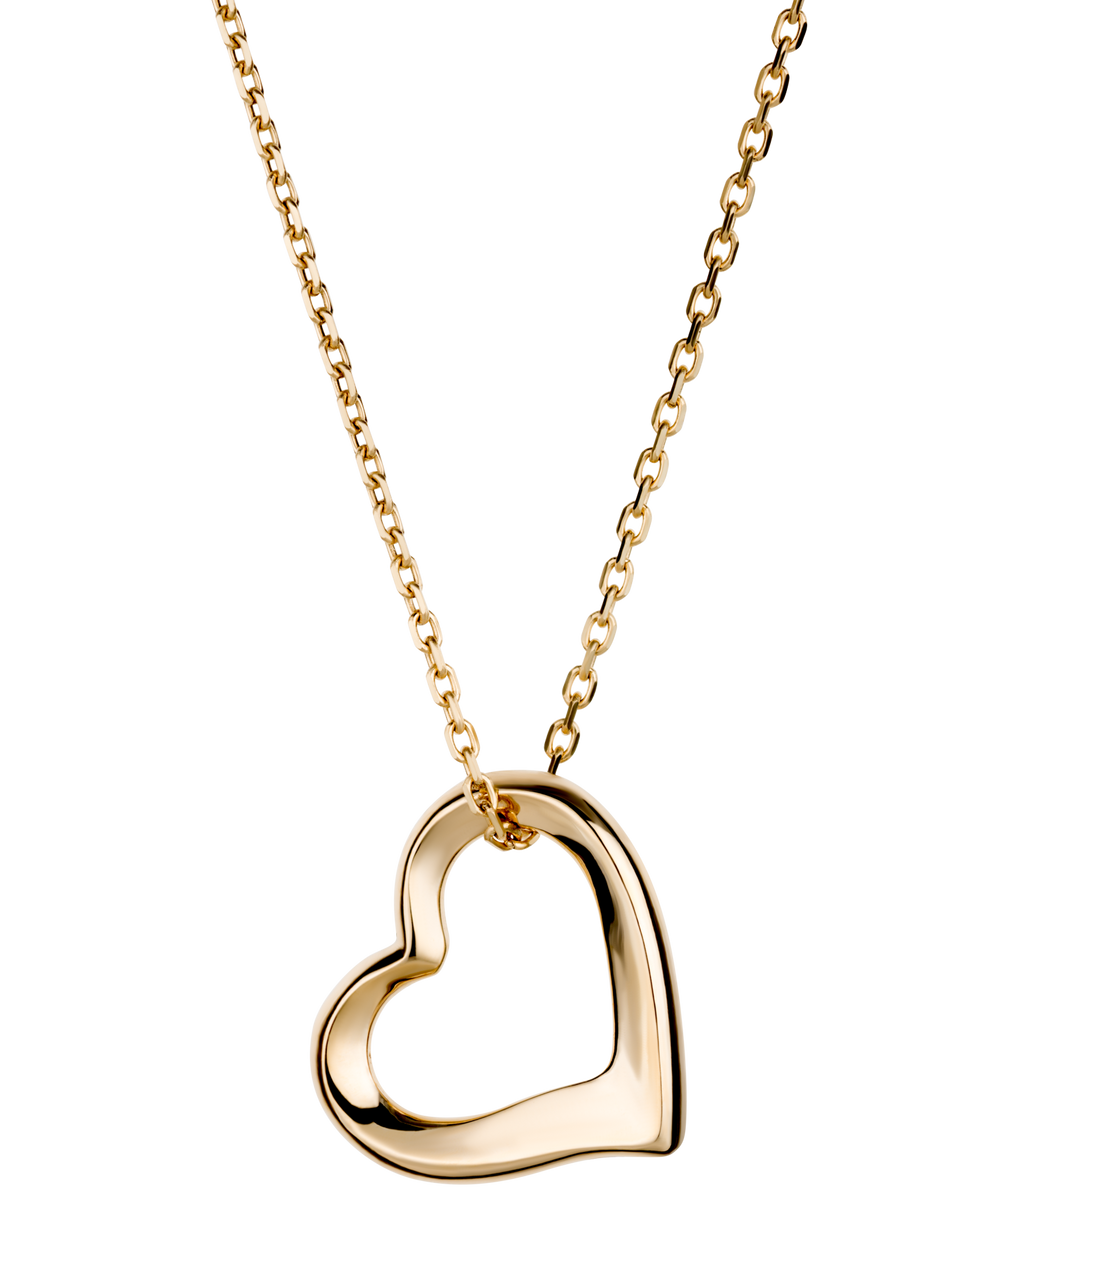 14kt Yellow Gold Heart Necklace